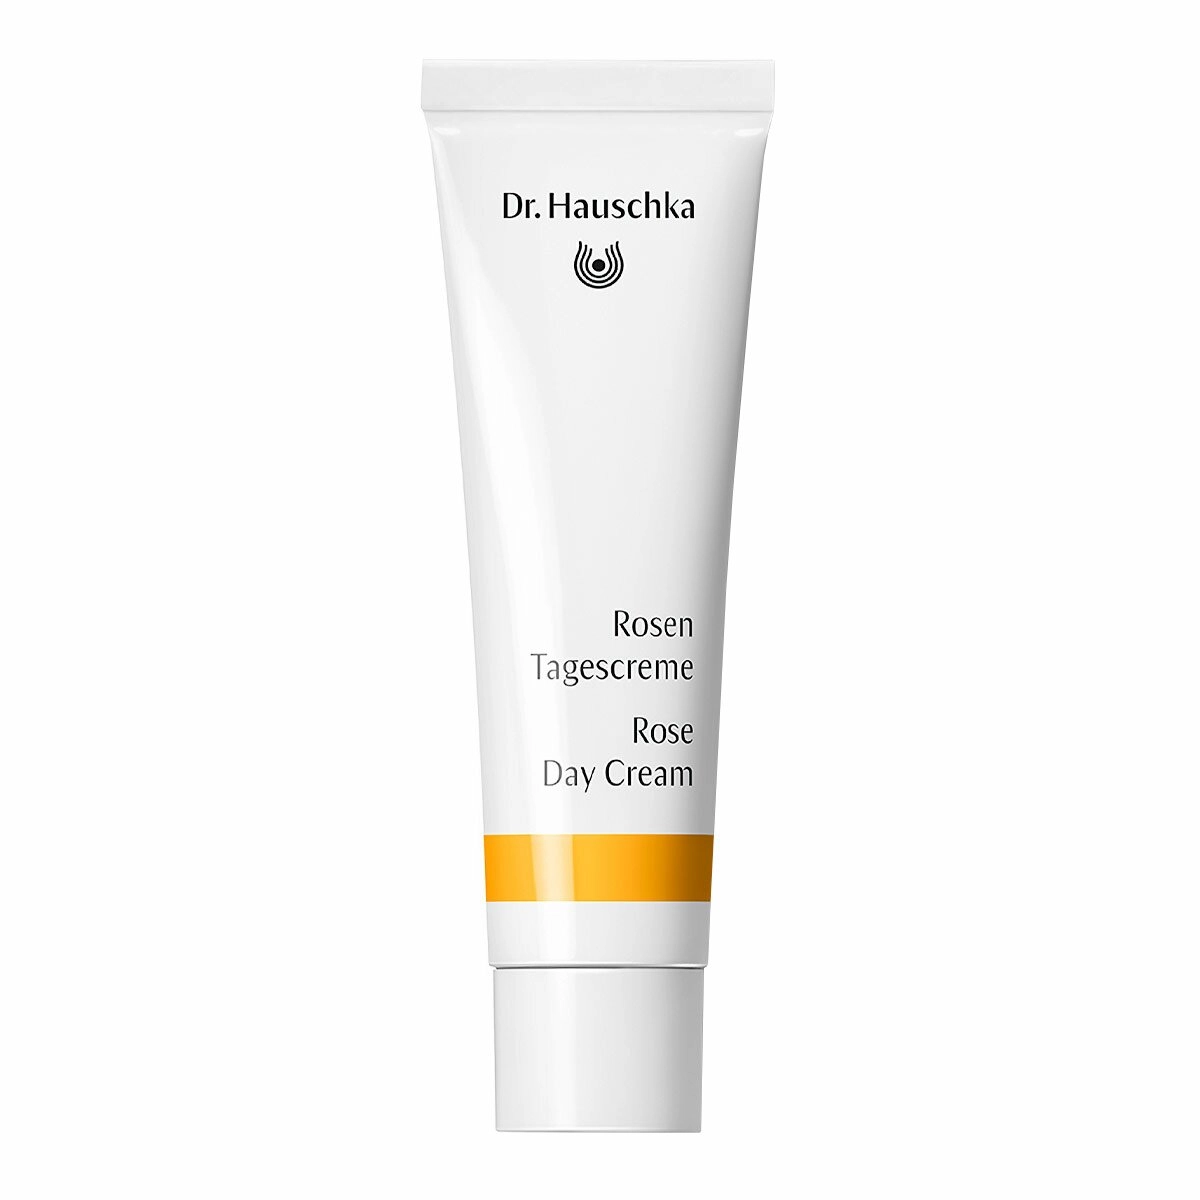 image of Dr. Hauschka Rose Day Cream 30ml on white background